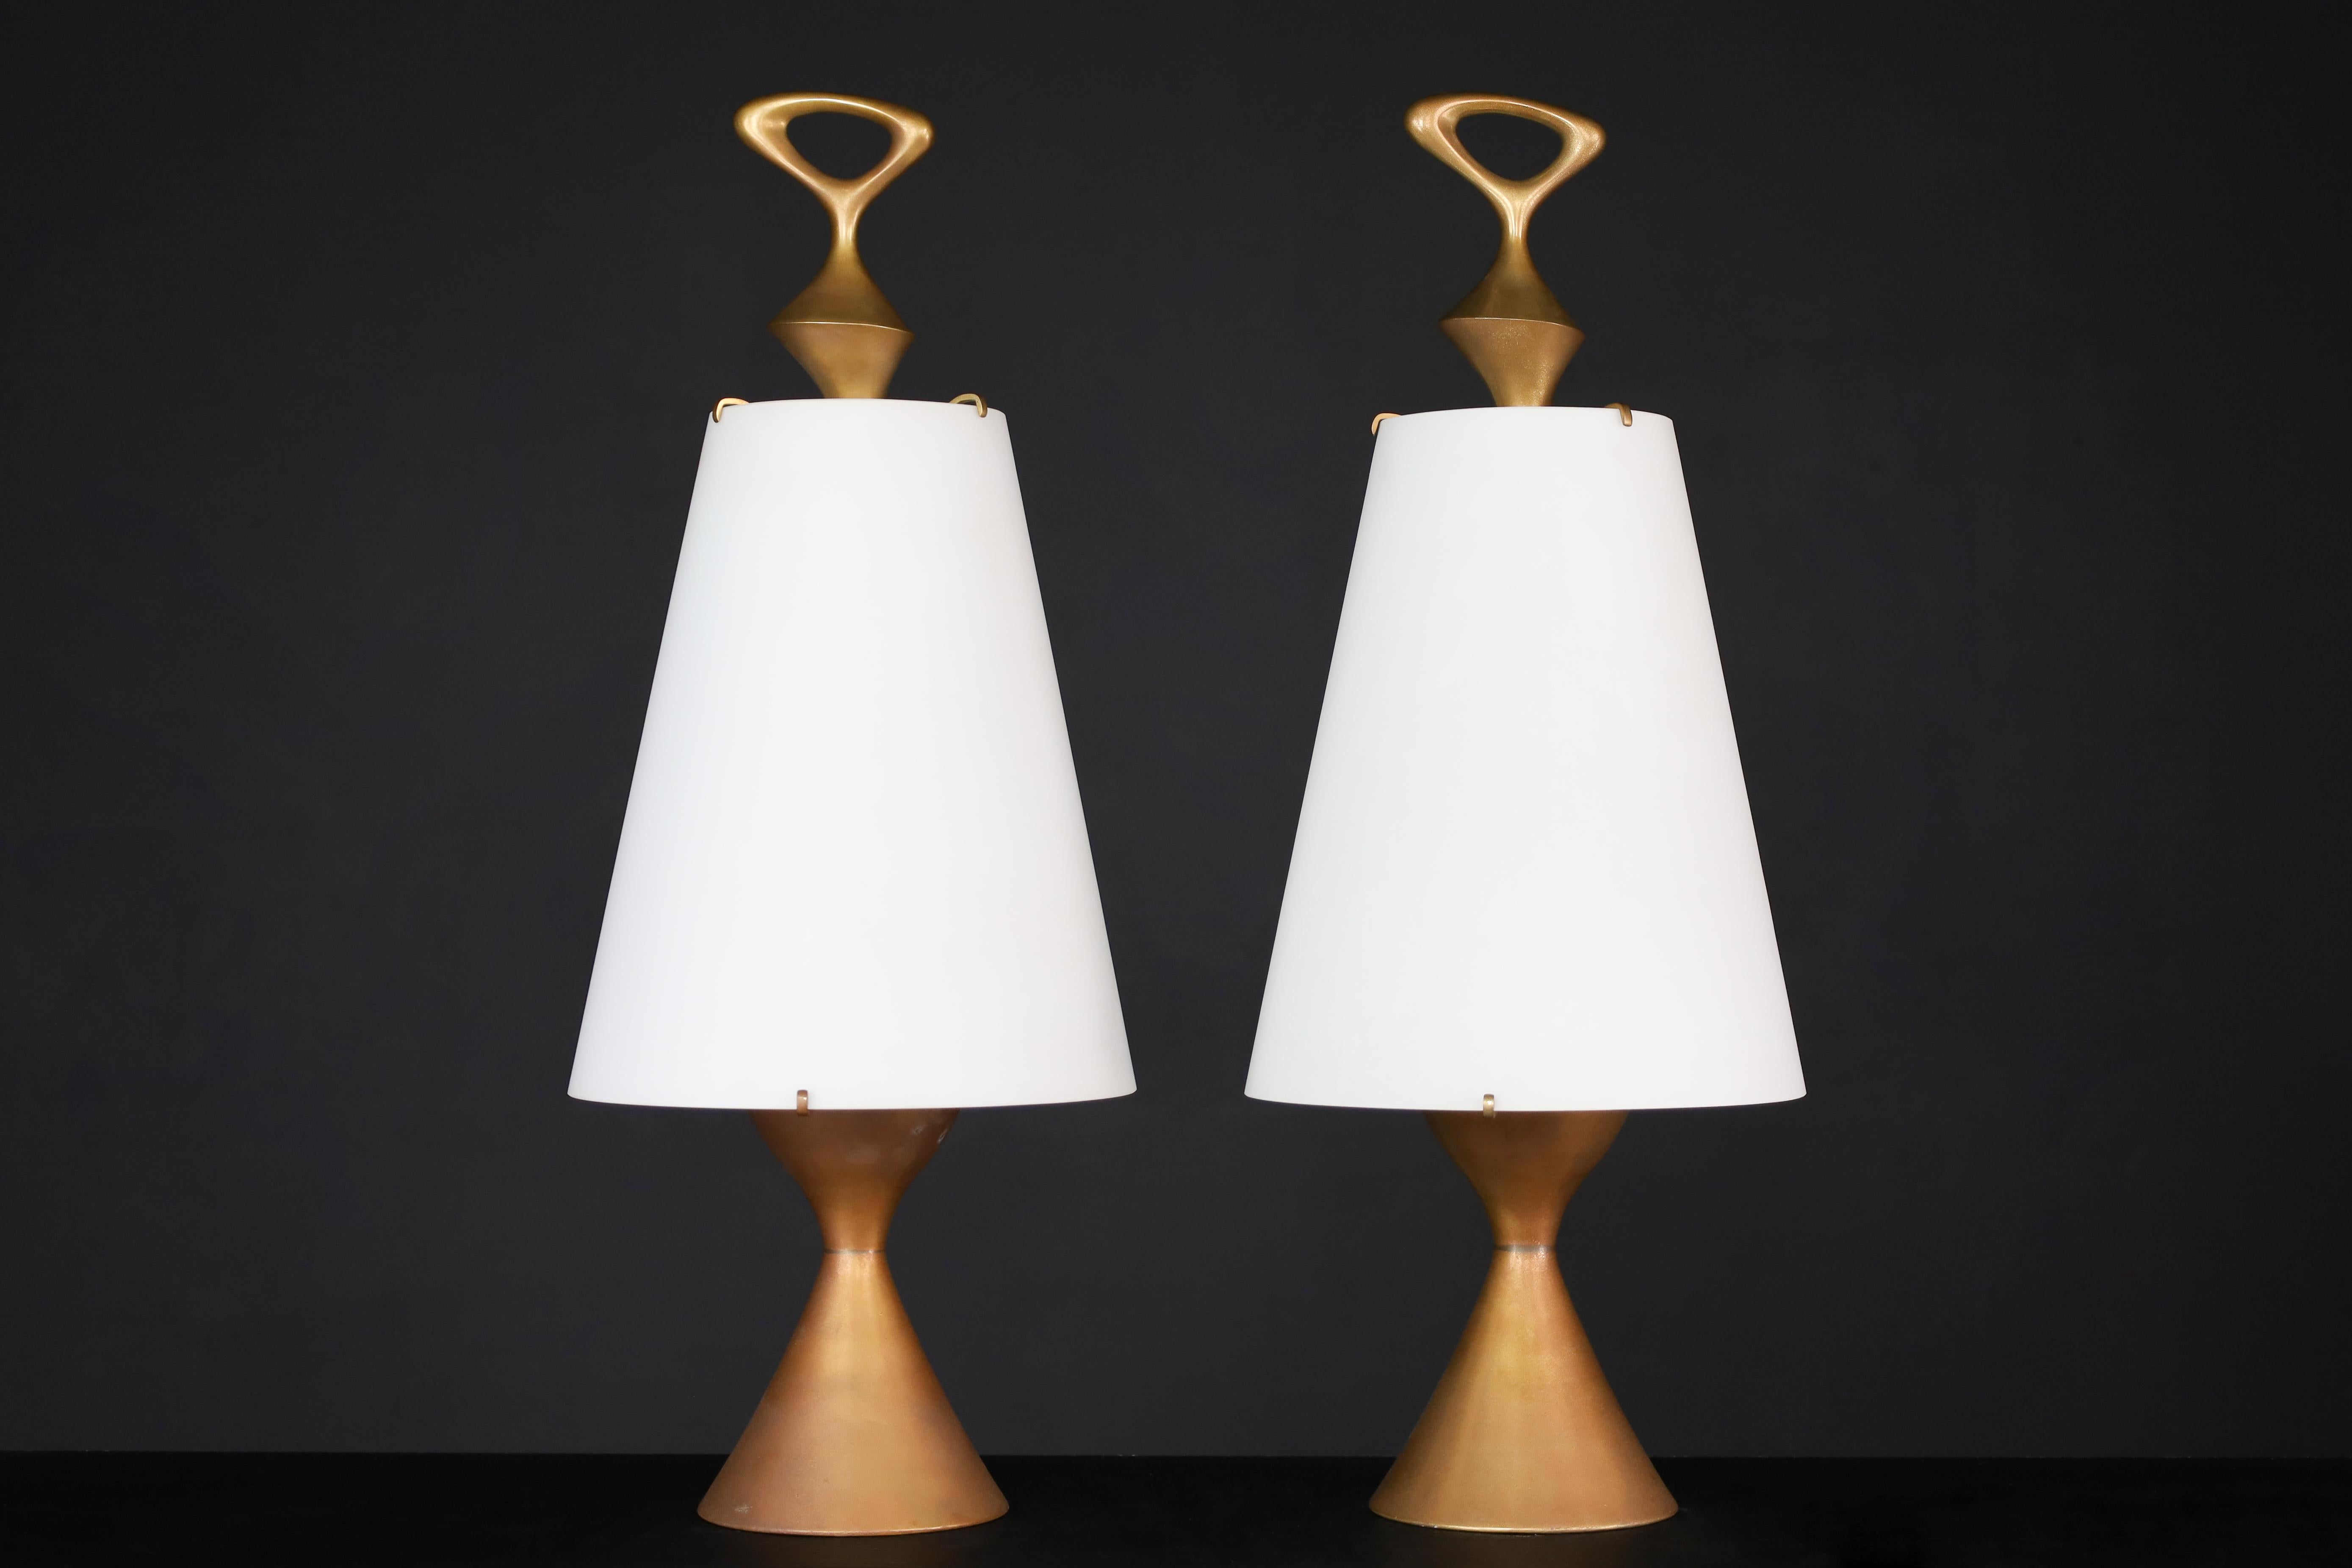 Max Ingrand for Fontana Arte pair of two patinated  Brass table lamps Italy 1956.

Max Ingrand designed a pair of exceptional table lamps for Fontana Arte in Italy in 1956. These lamps have a stunning hourglass-shaped base made of patinated brass